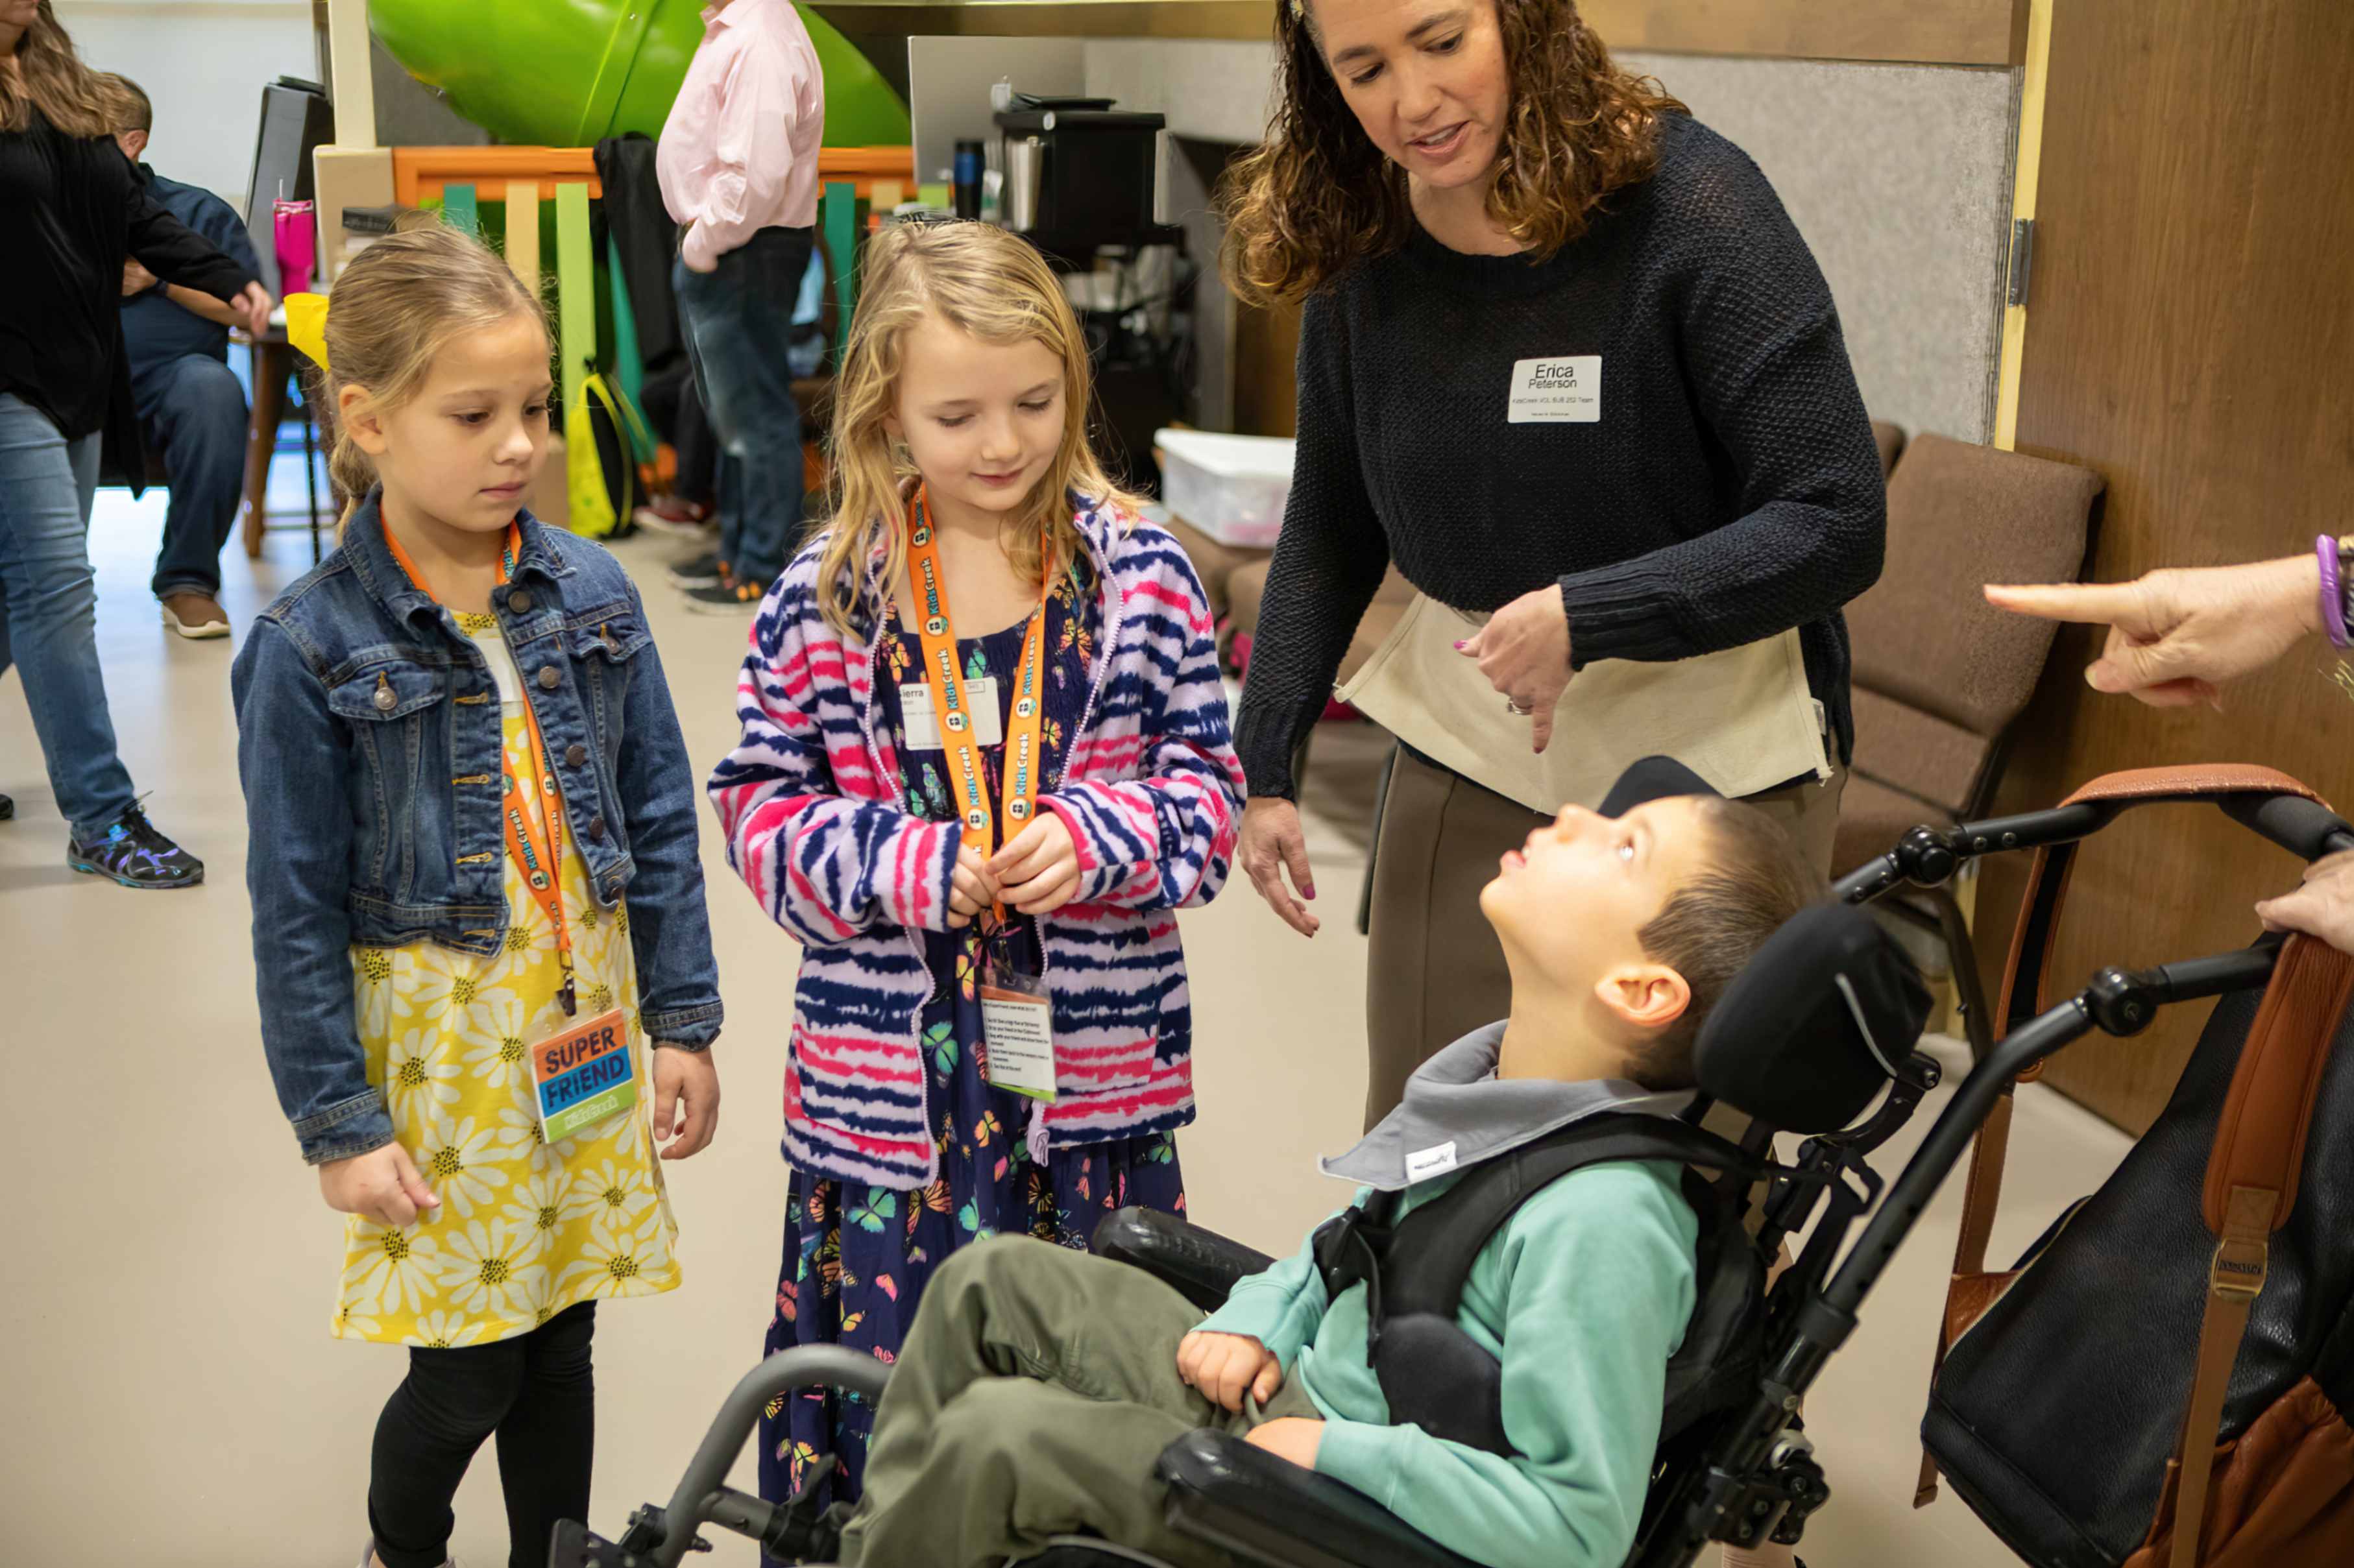 Two children and an adult leader greet a child in a wheelchair.